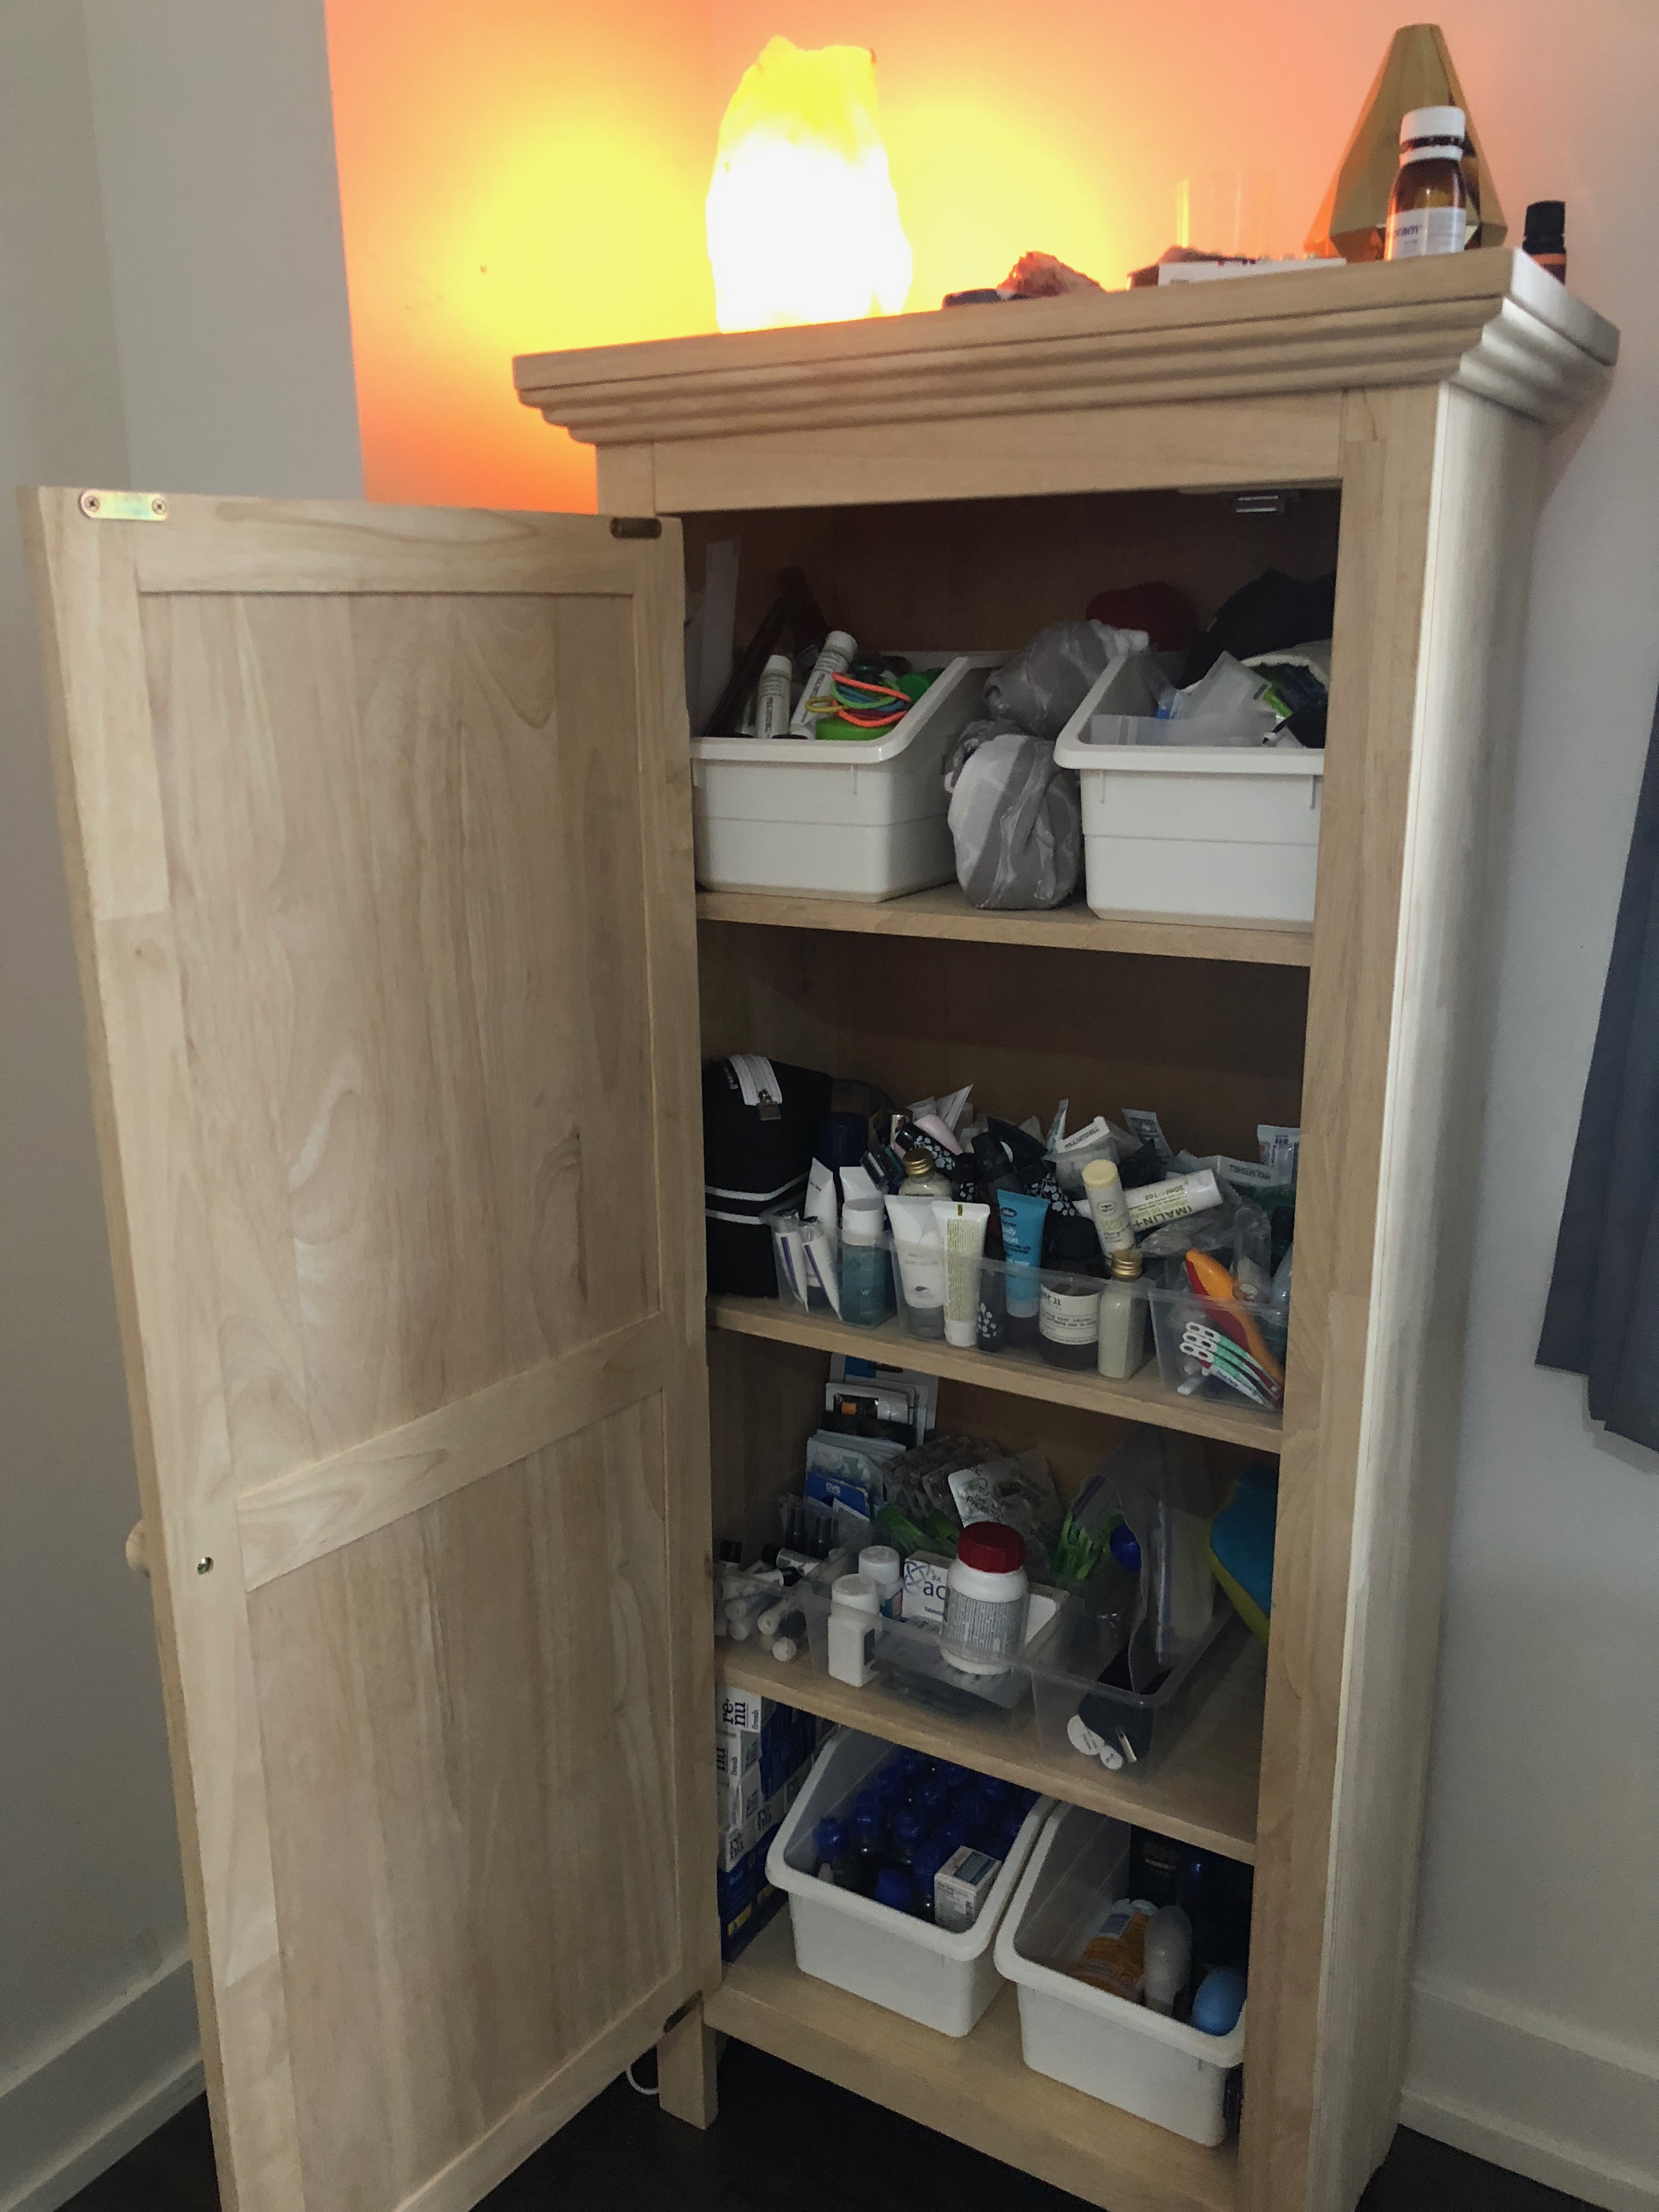 a wooden cabinet with a shelf full of items